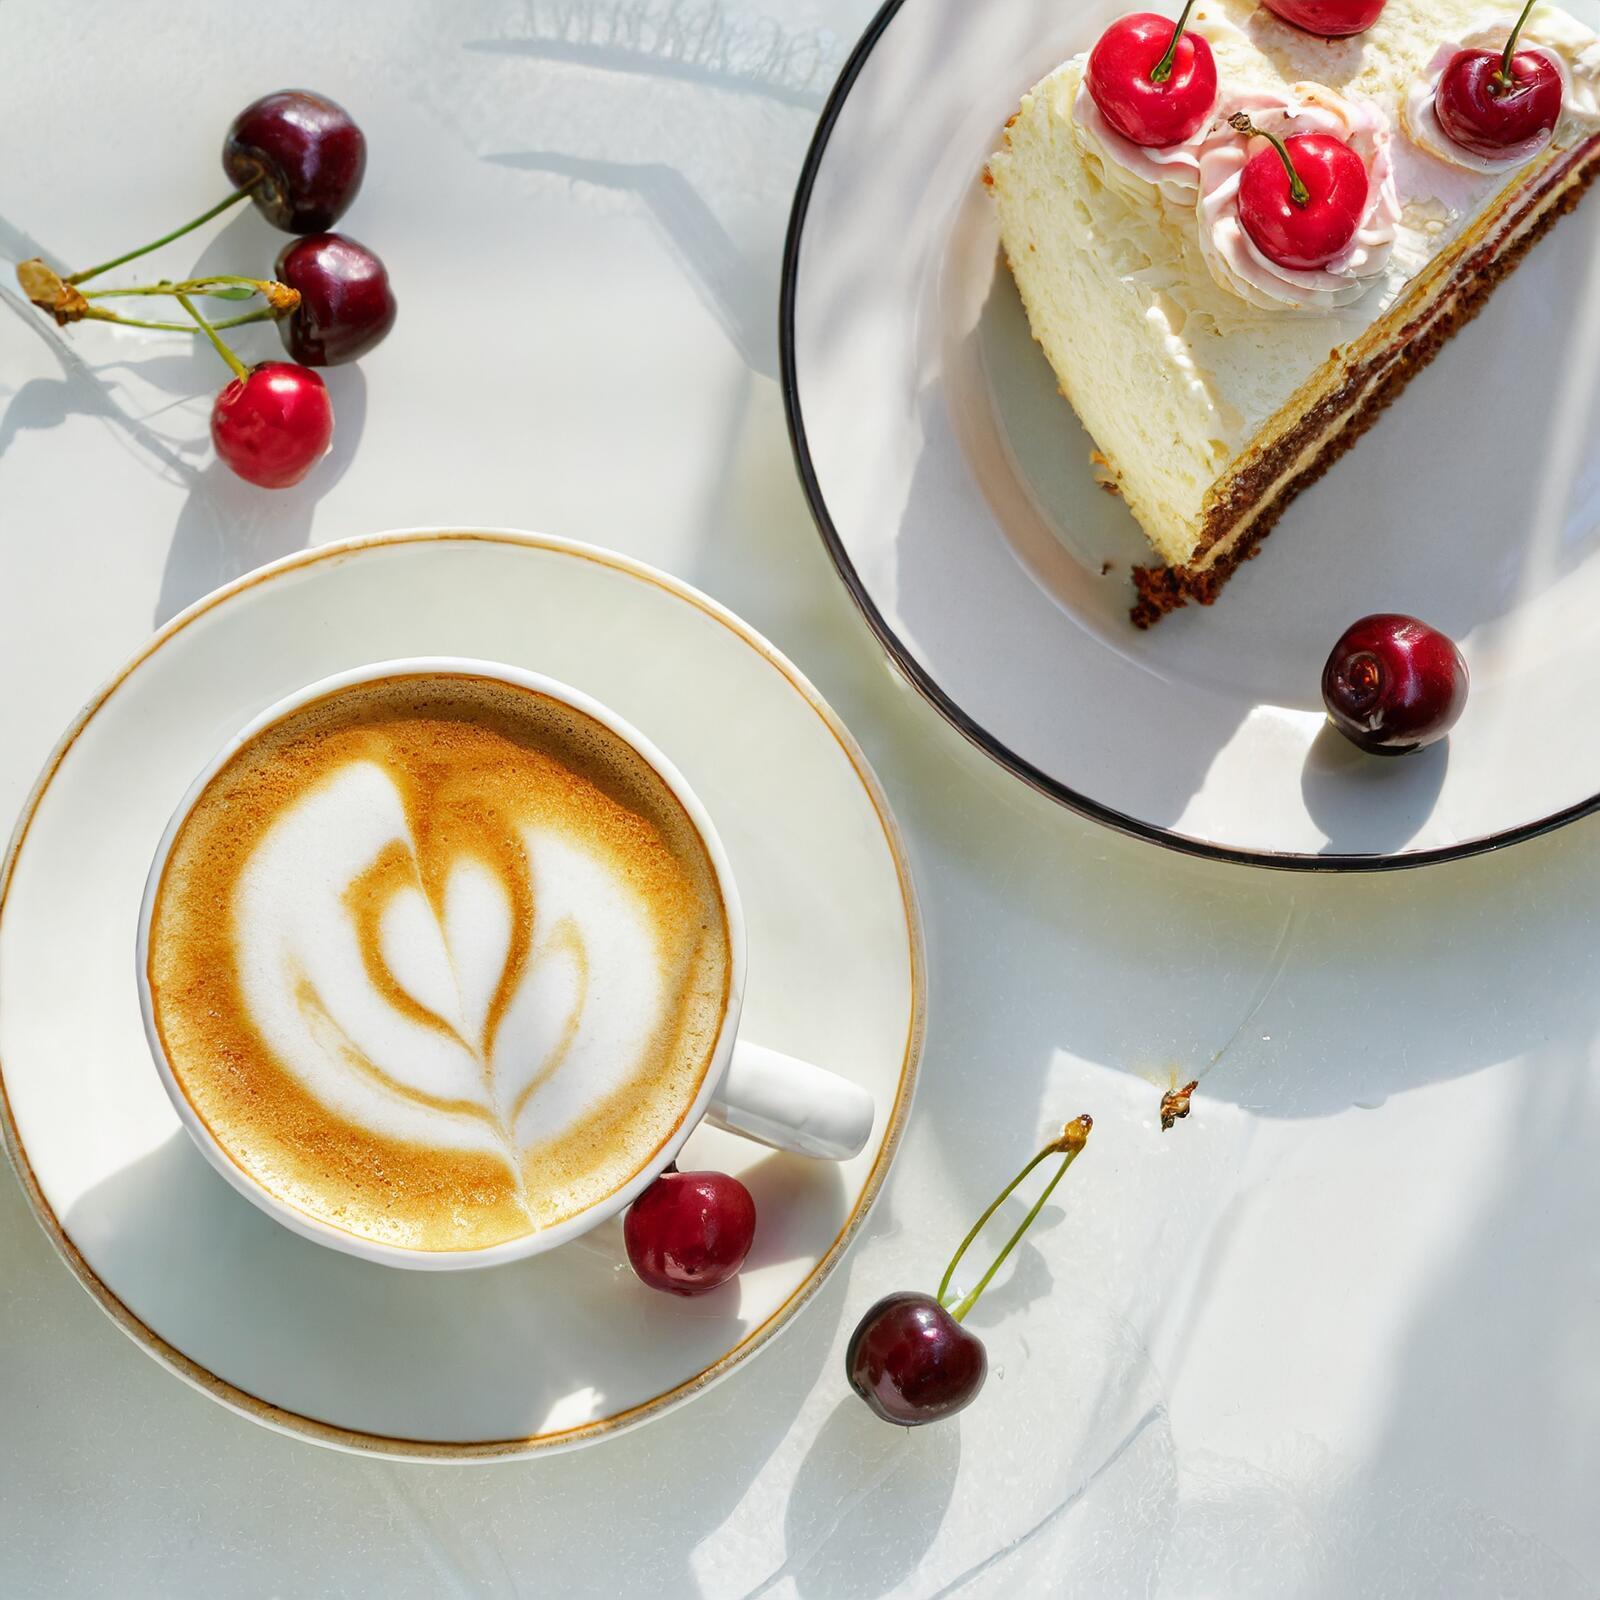 Free photo A white cup of cappuccino coffee next to a plate with a slice of cake on it